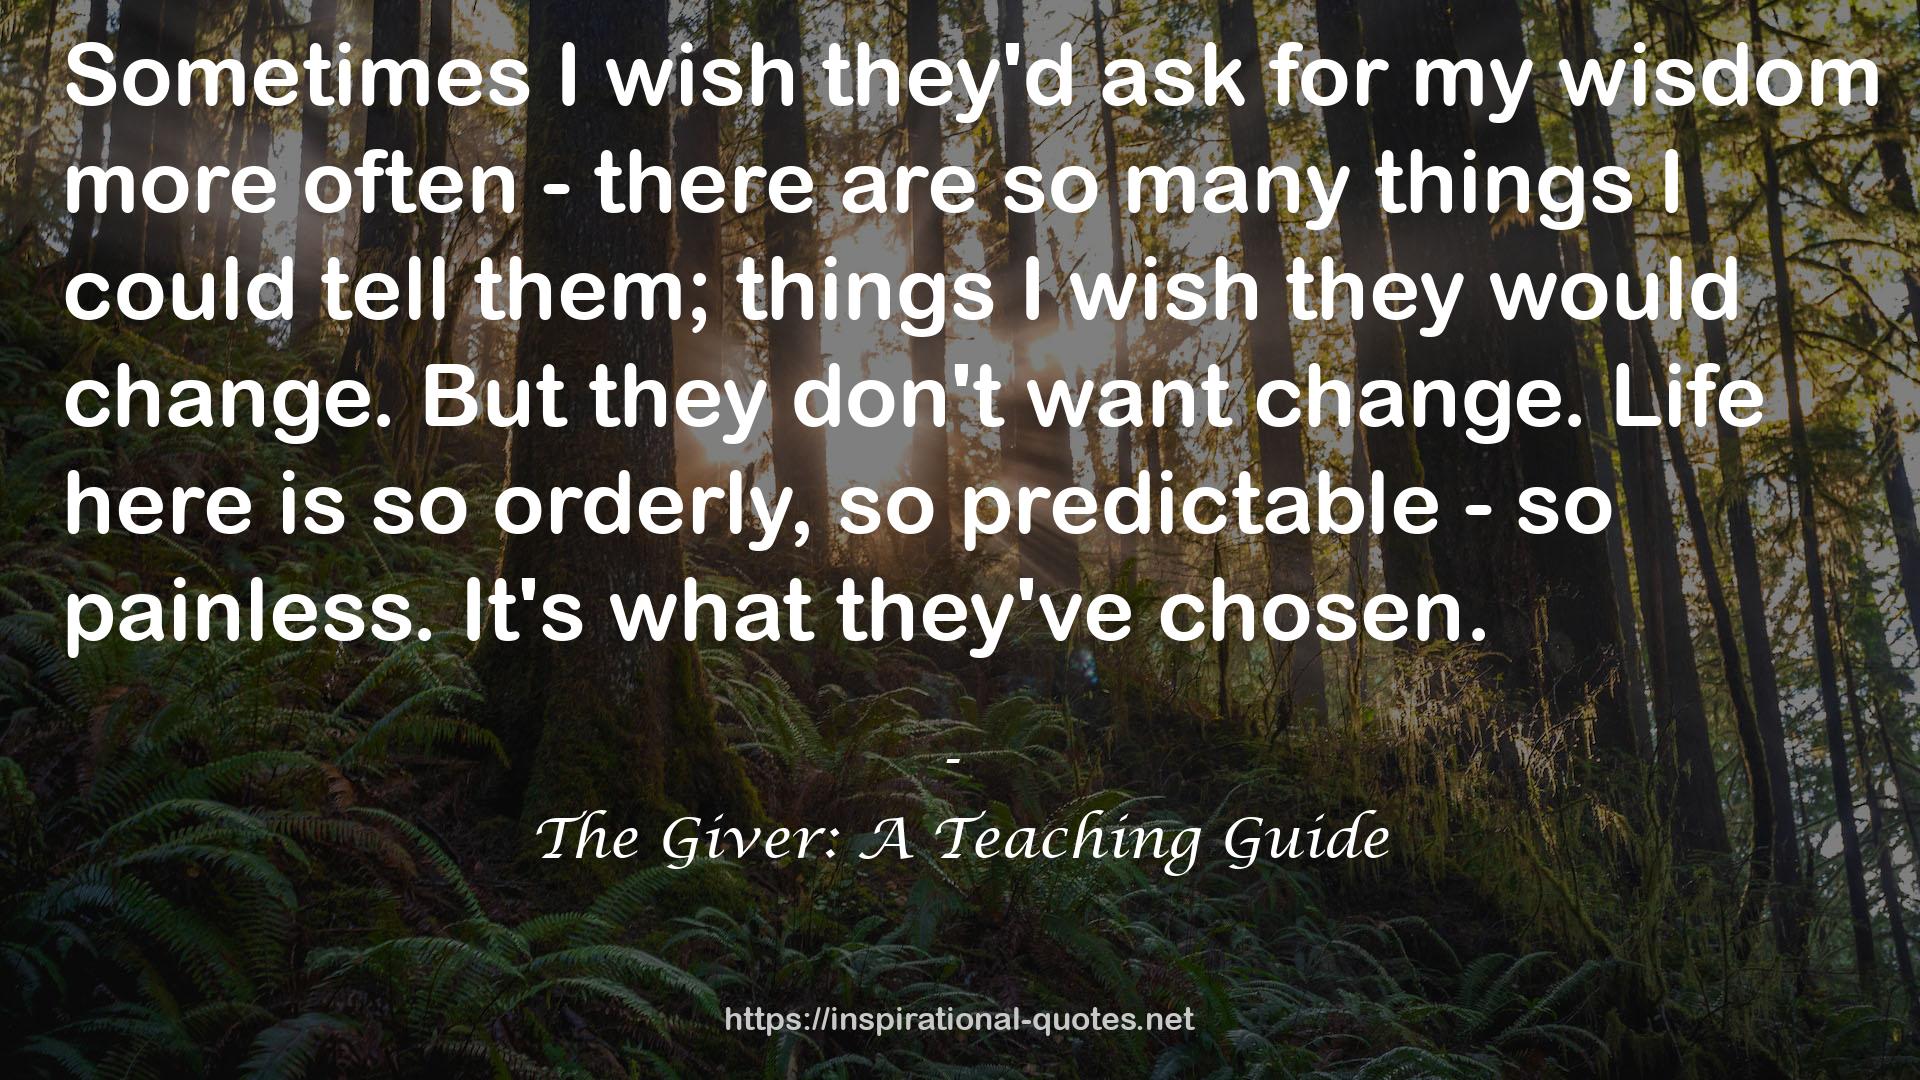 The Giver: A Teaching Guide QUOTES